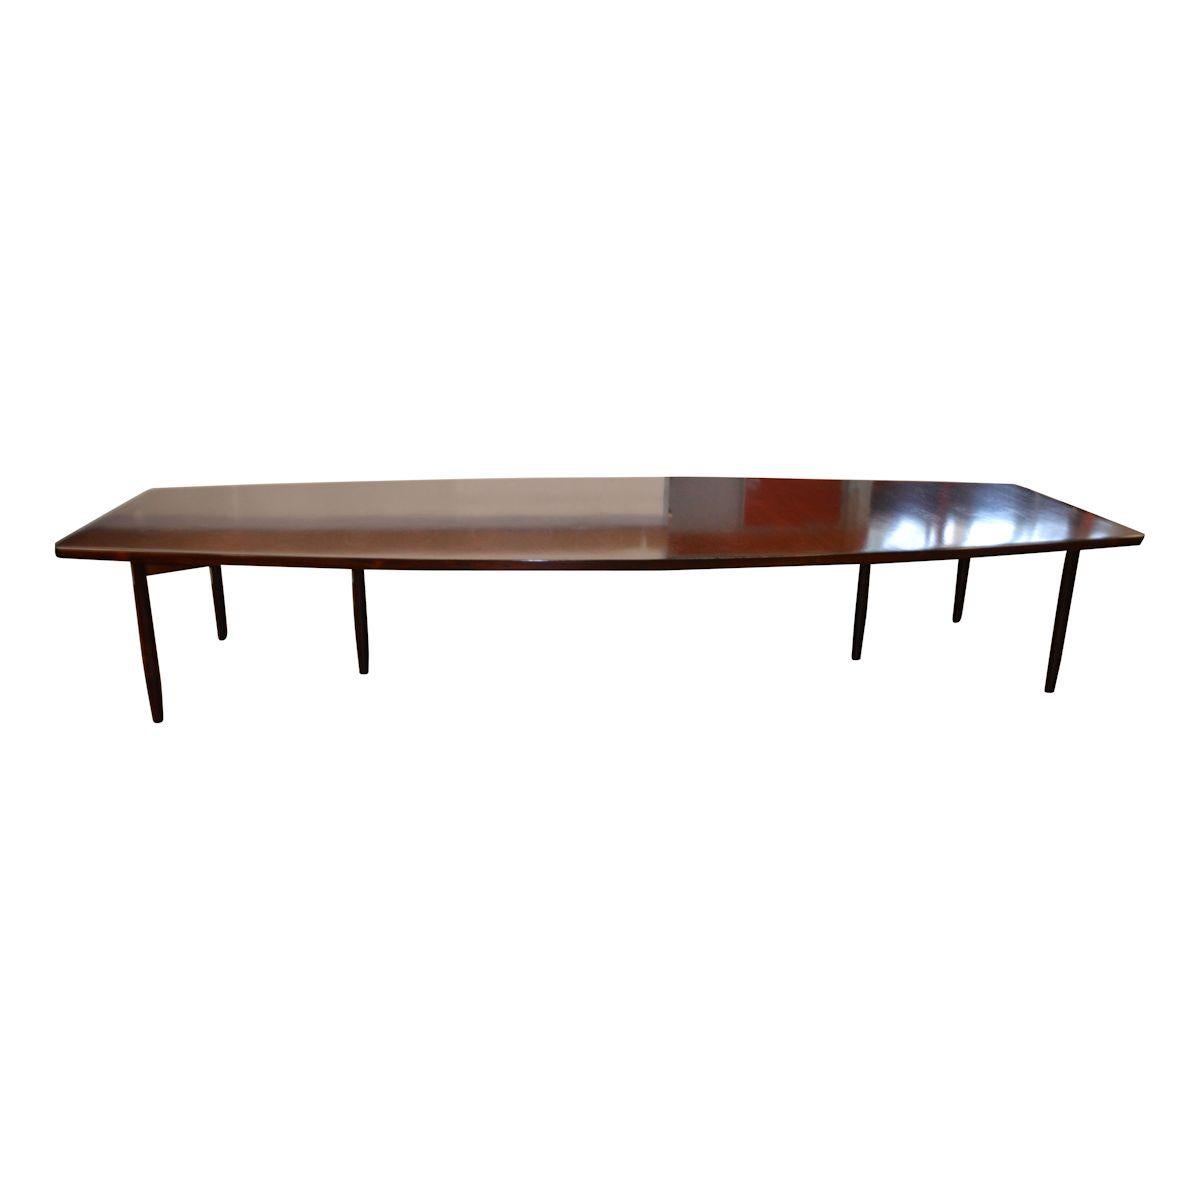 Mid-20th Century Danish design extremaly Large Palisander Boat-Shape Conference Table For Sale